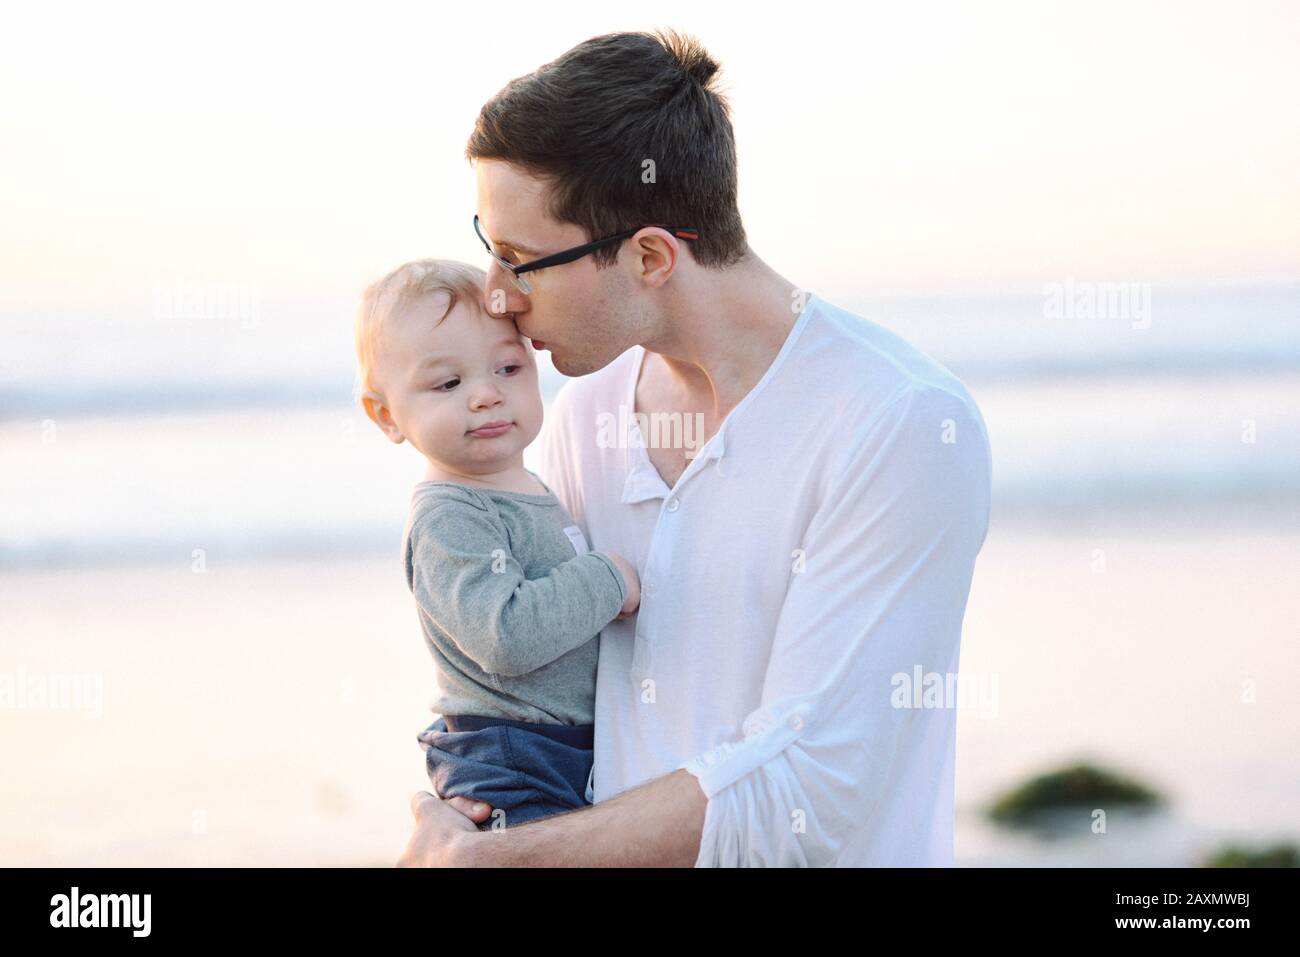 A young father giving his son a kiss on the temple at the beach Stock Photo  - Alamy